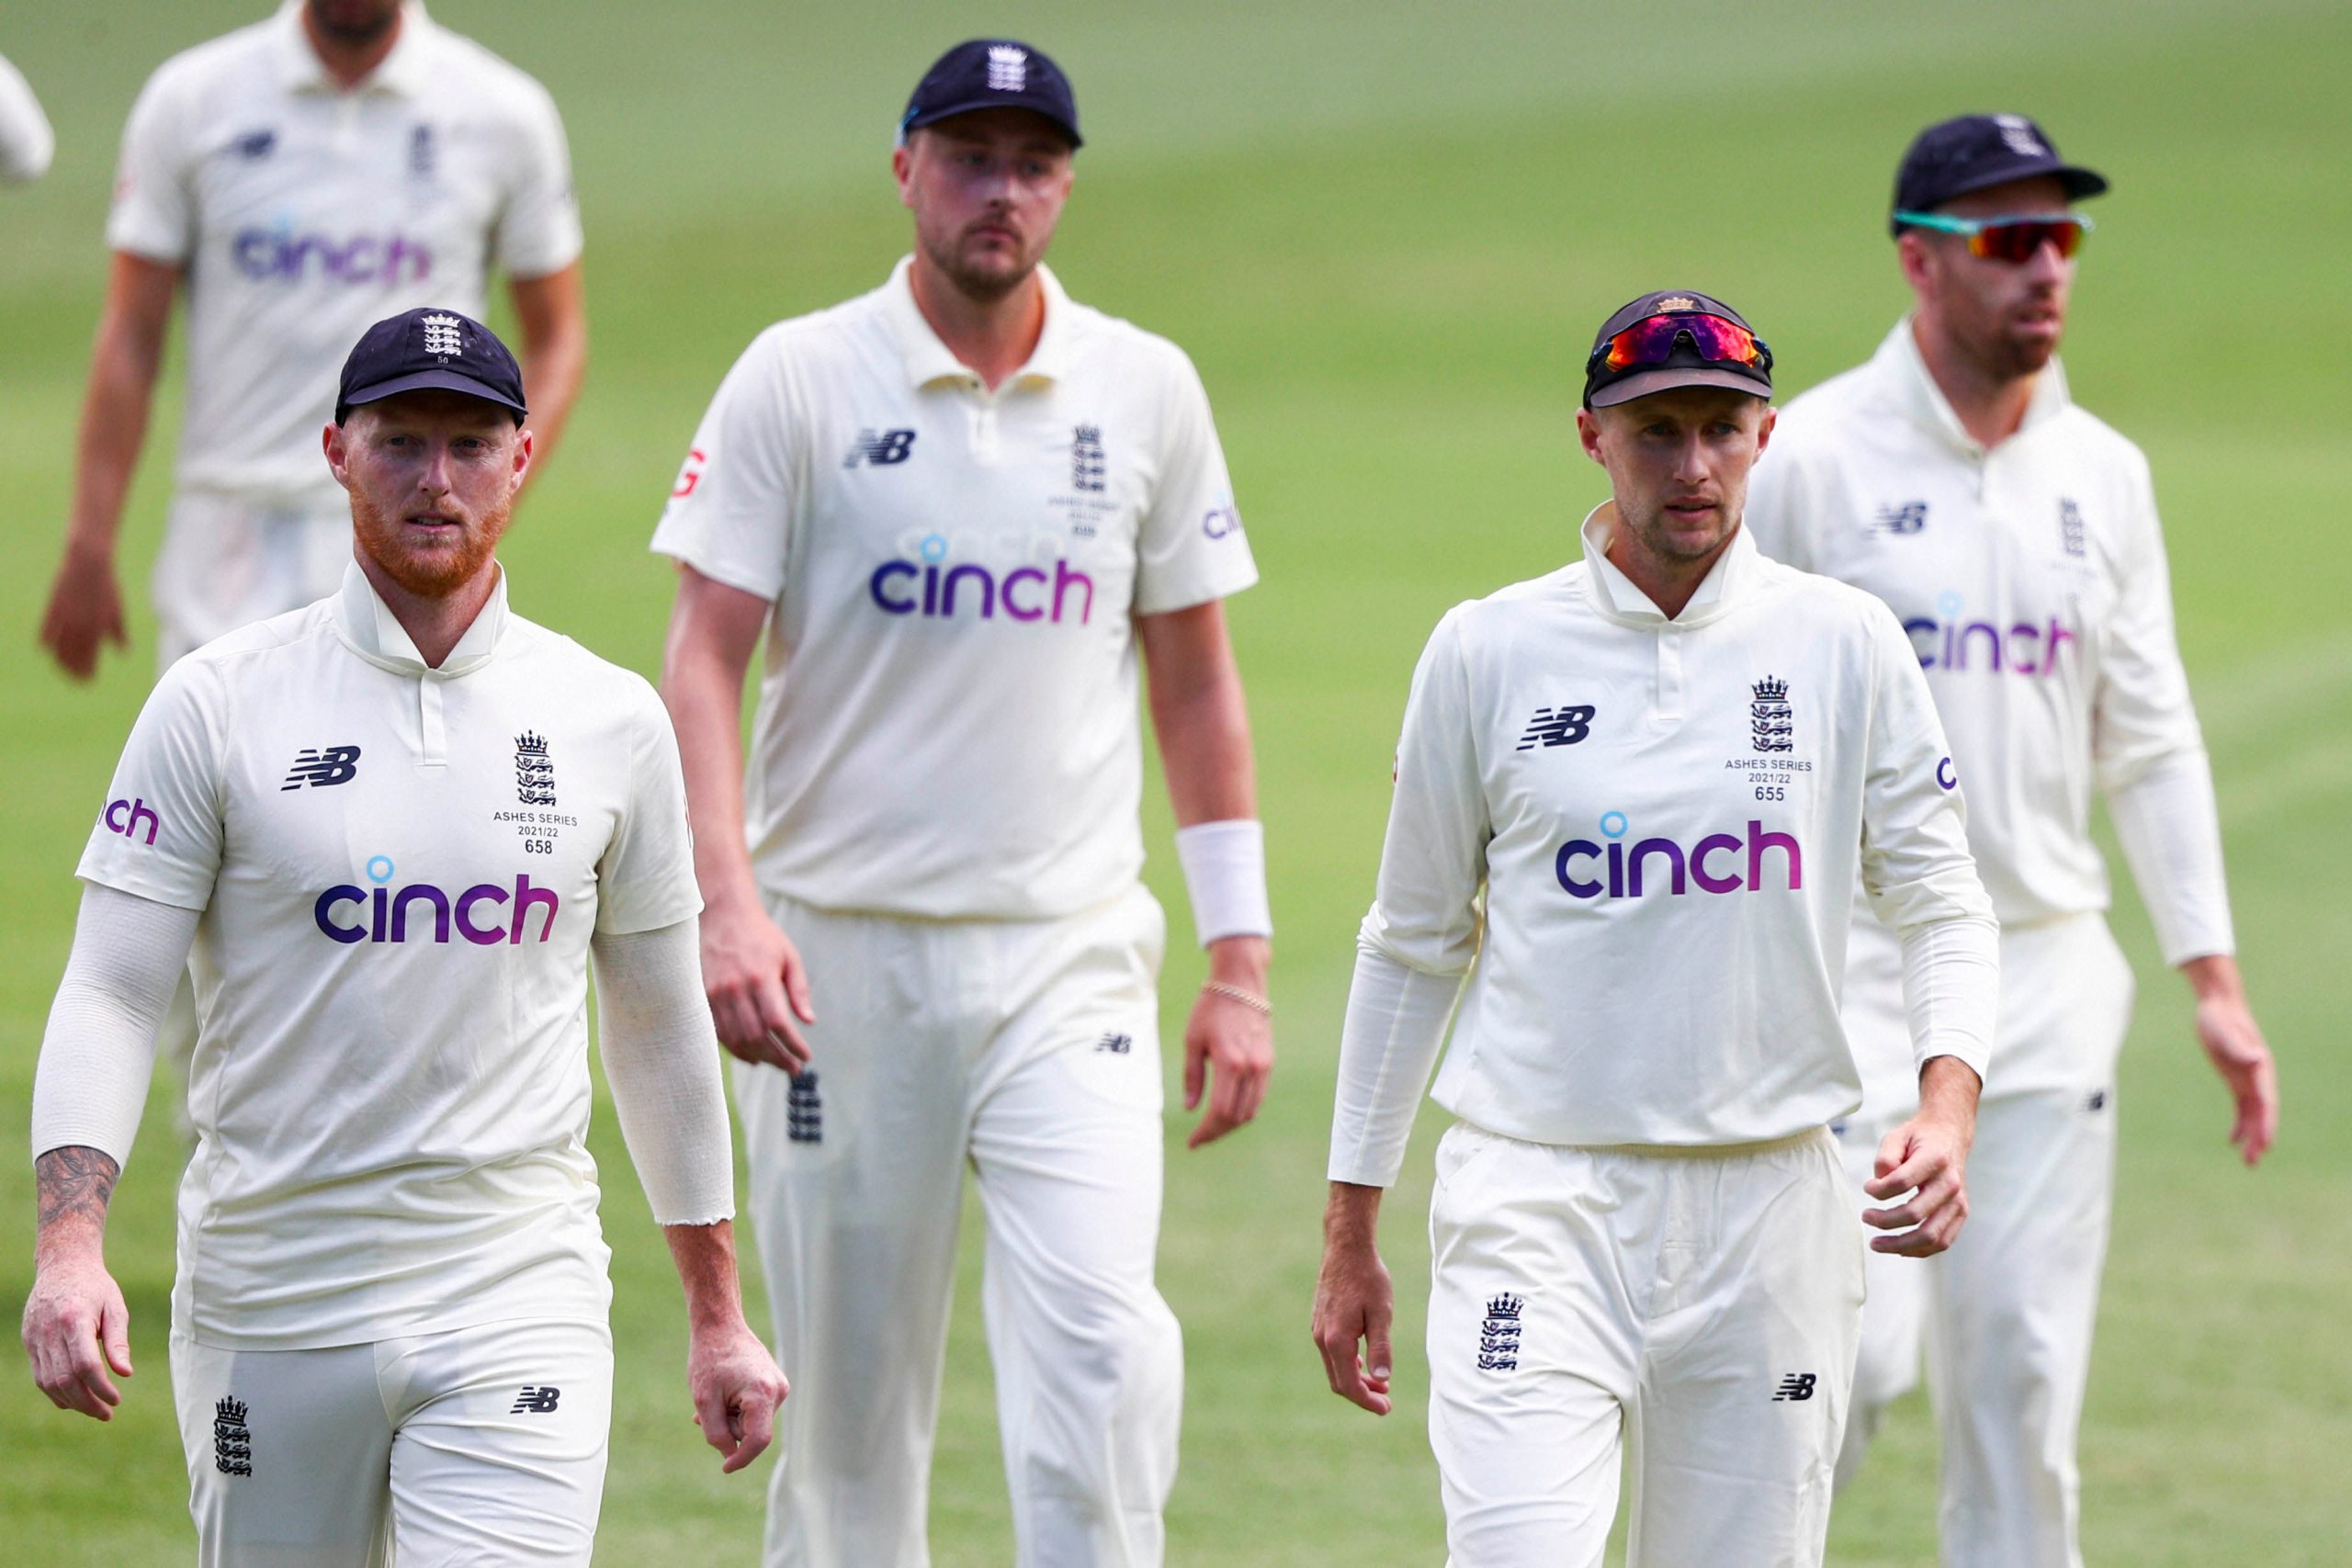 Ashes: Joe Root certain of Ben Stokes delivering a magical performance ahead of 2nd Test